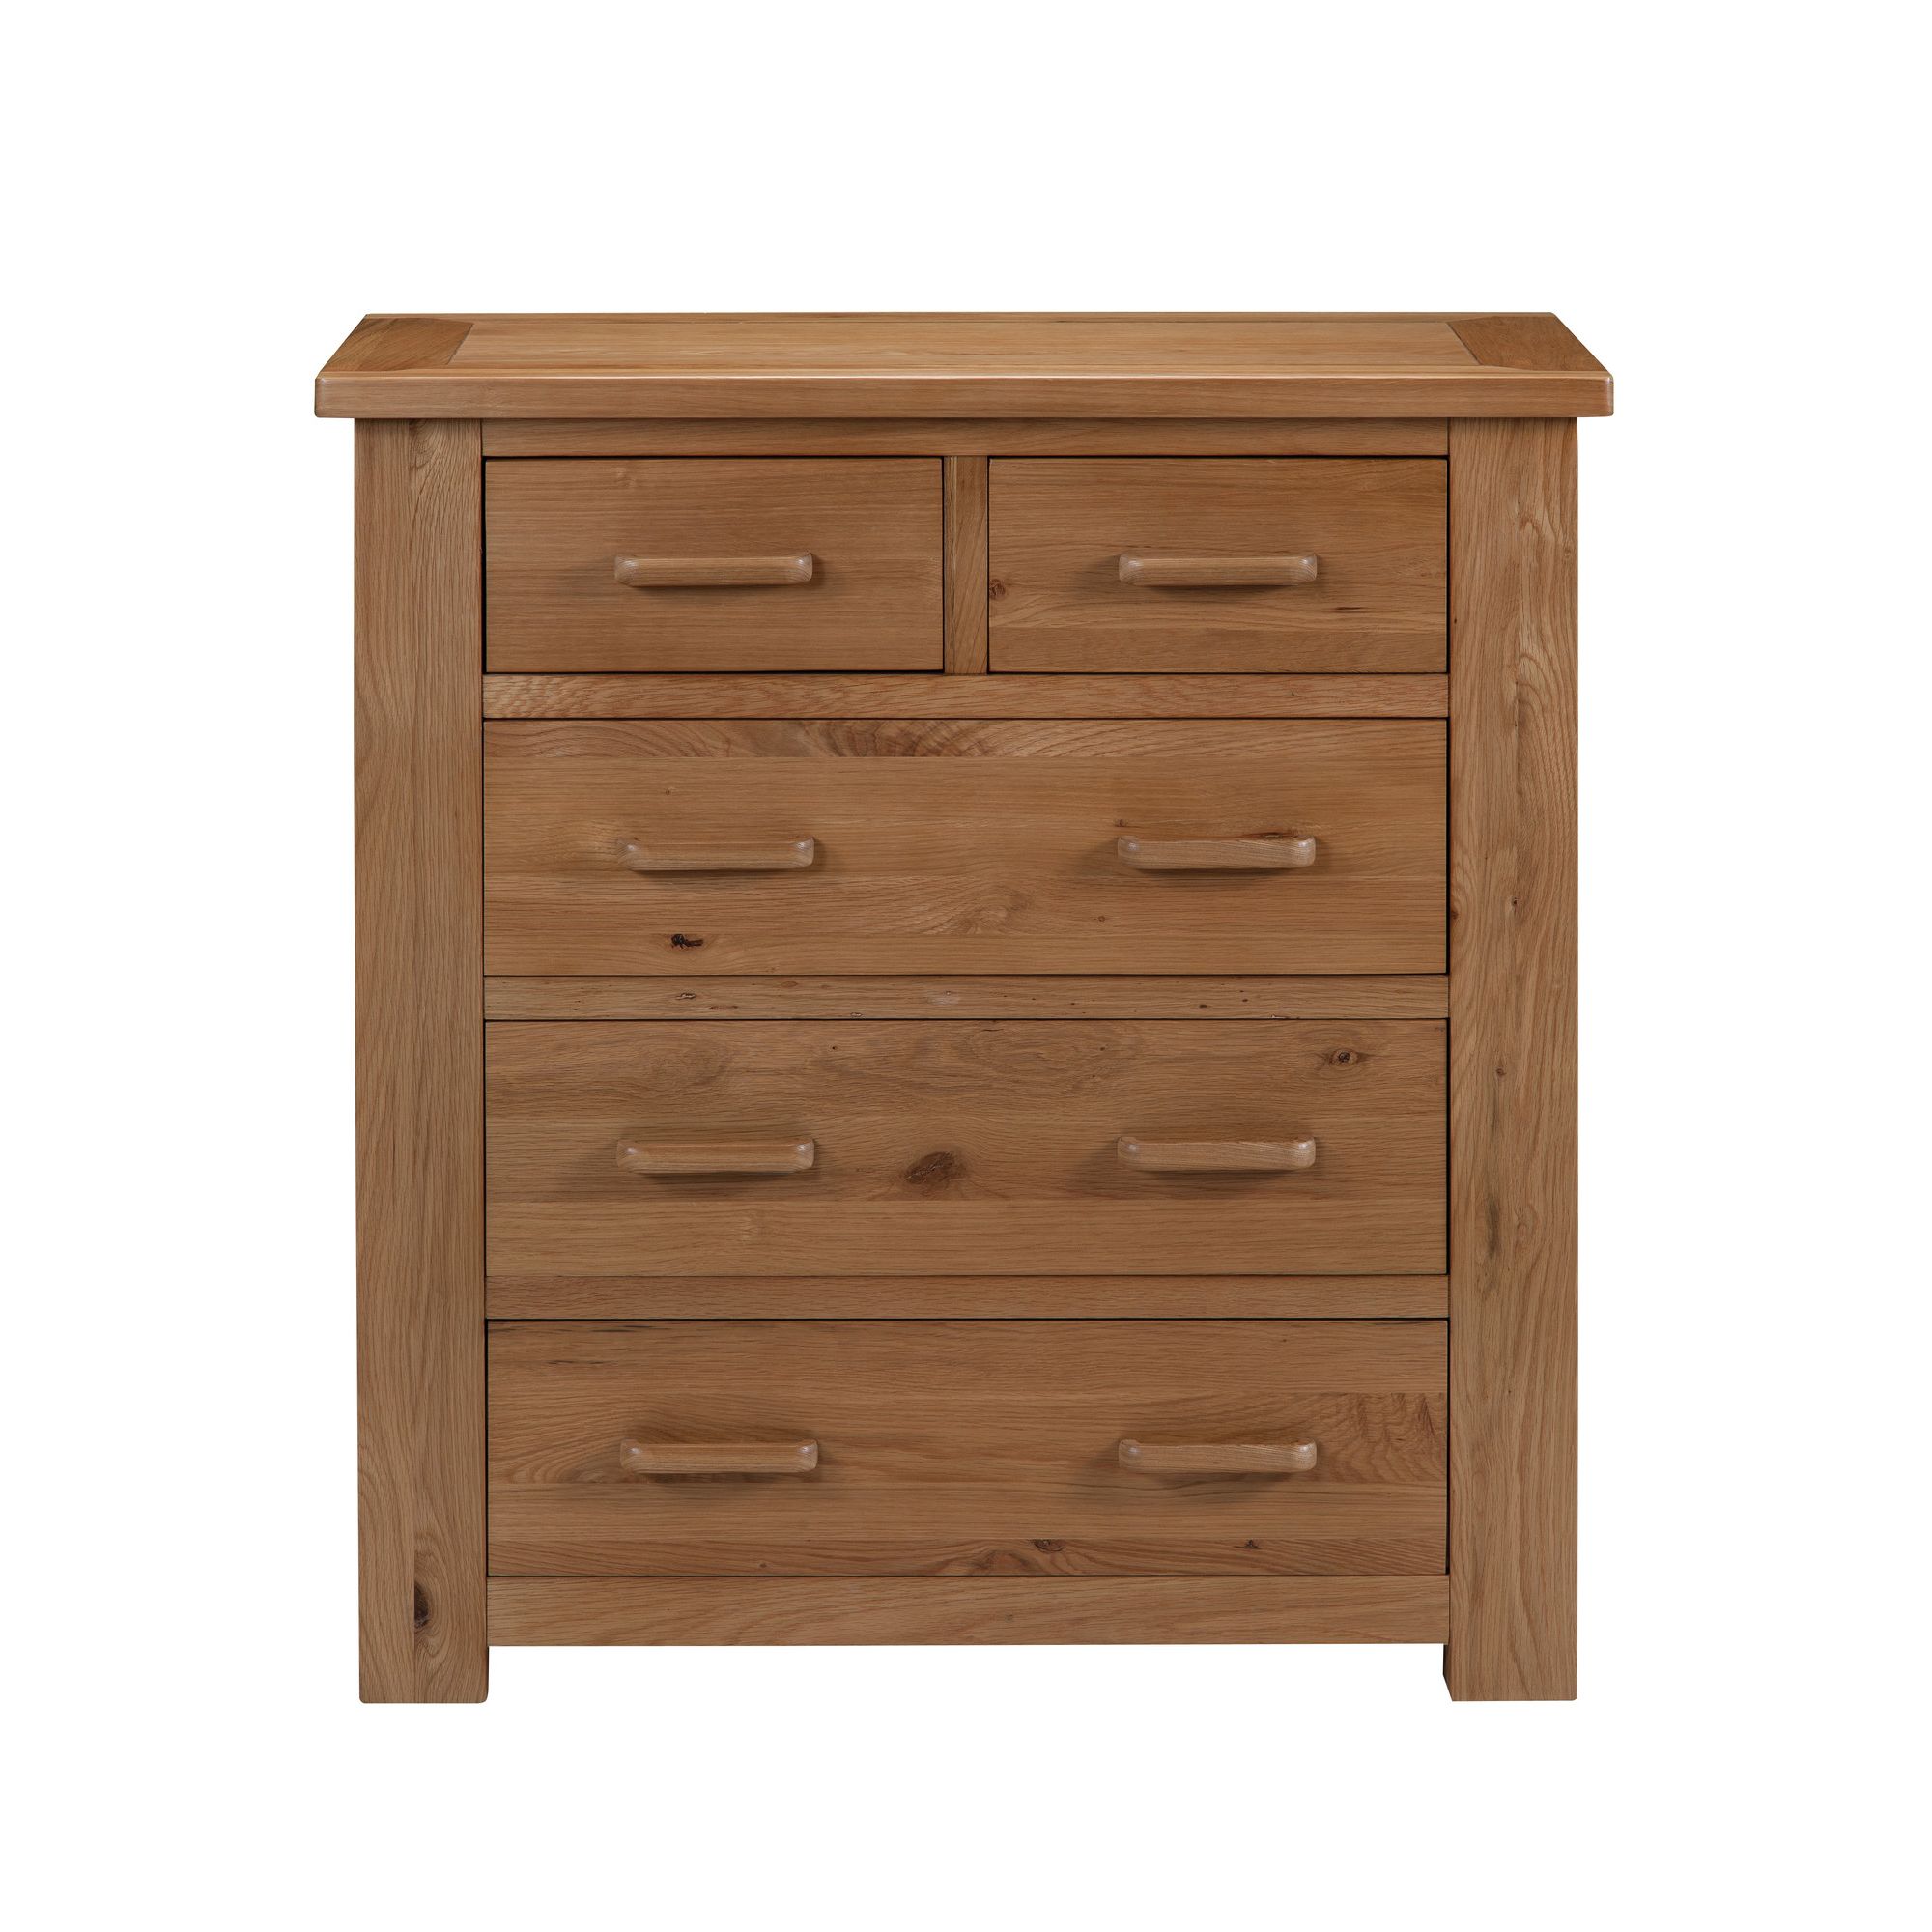 Alterton Furniture Wiltshire 2 Over 3 Drawer Chest at Tesco Direct